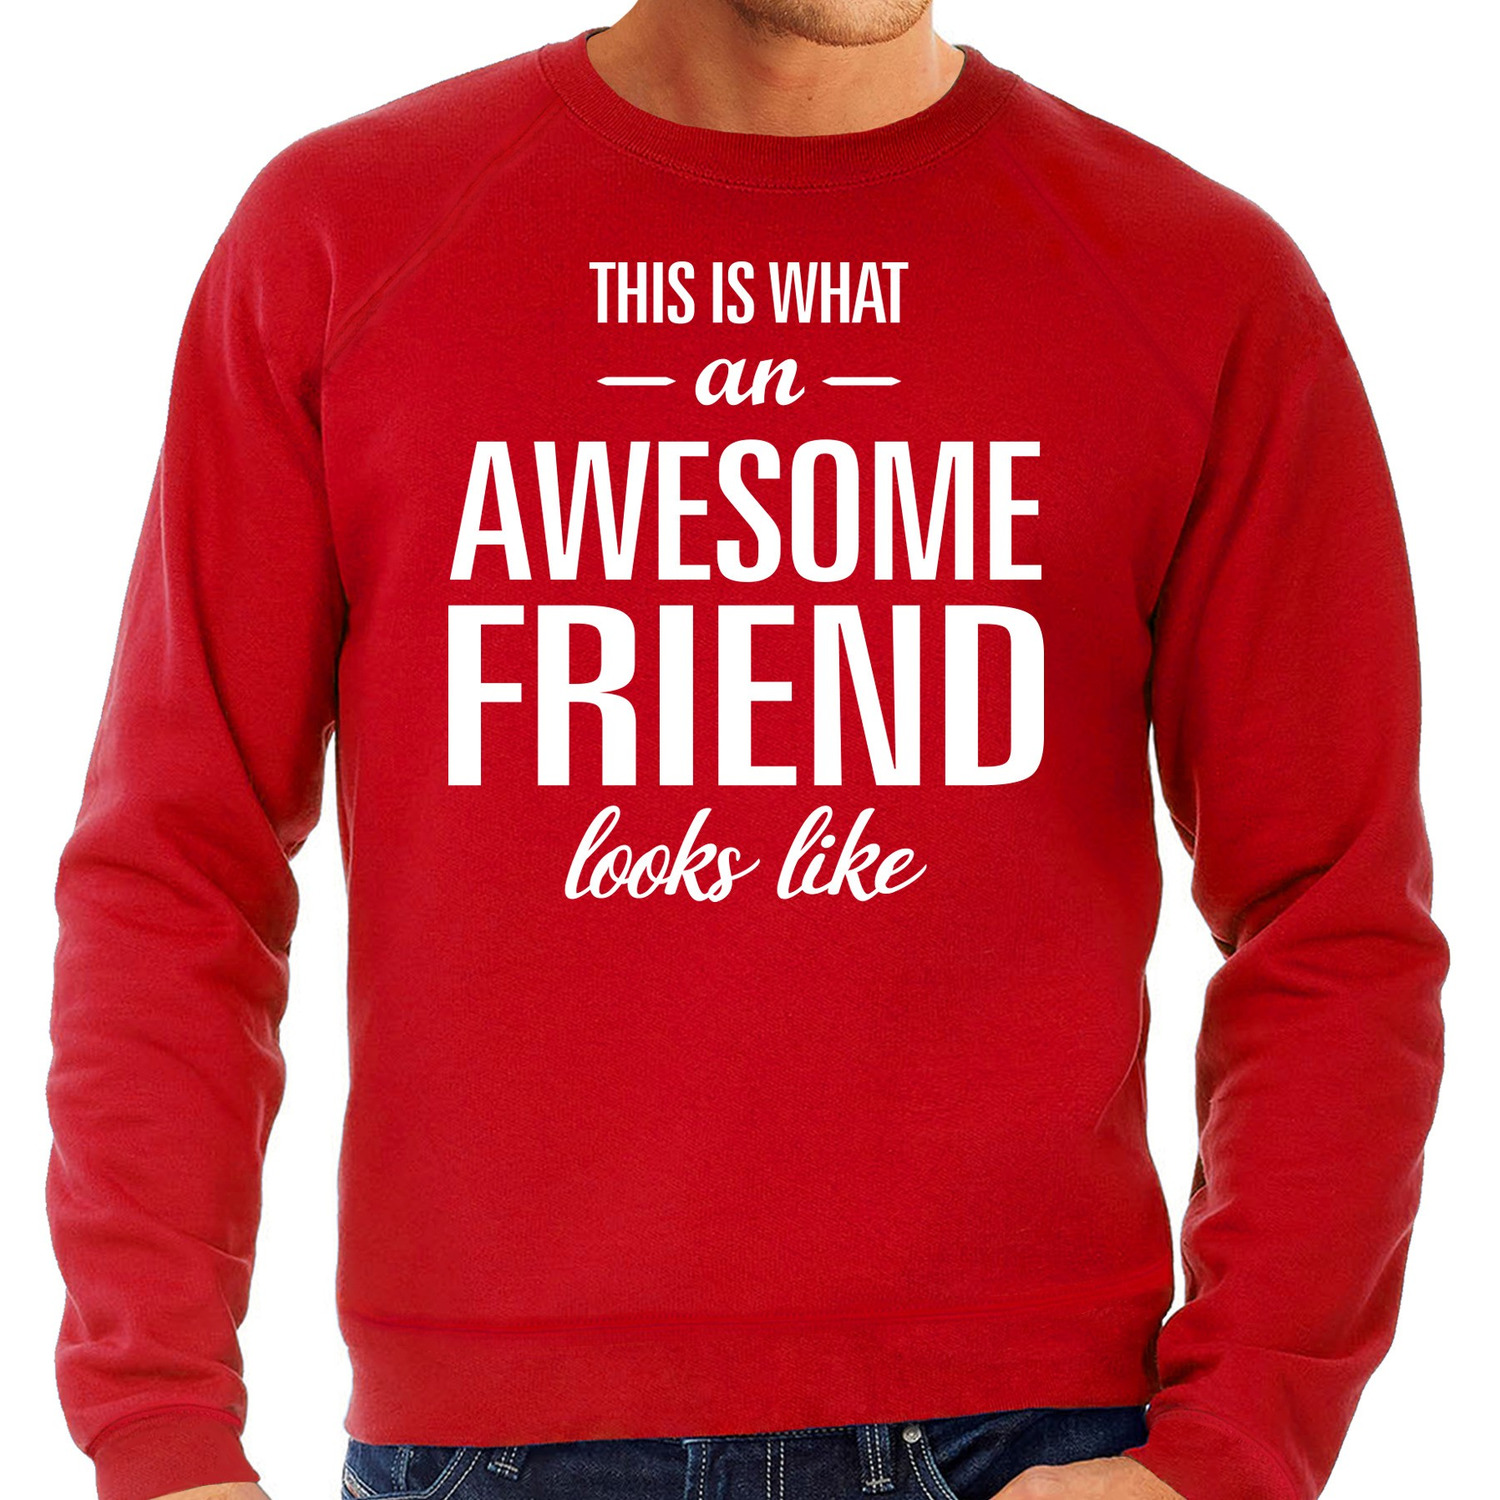 Awesome friend-vriend cadeau sweater rood heren